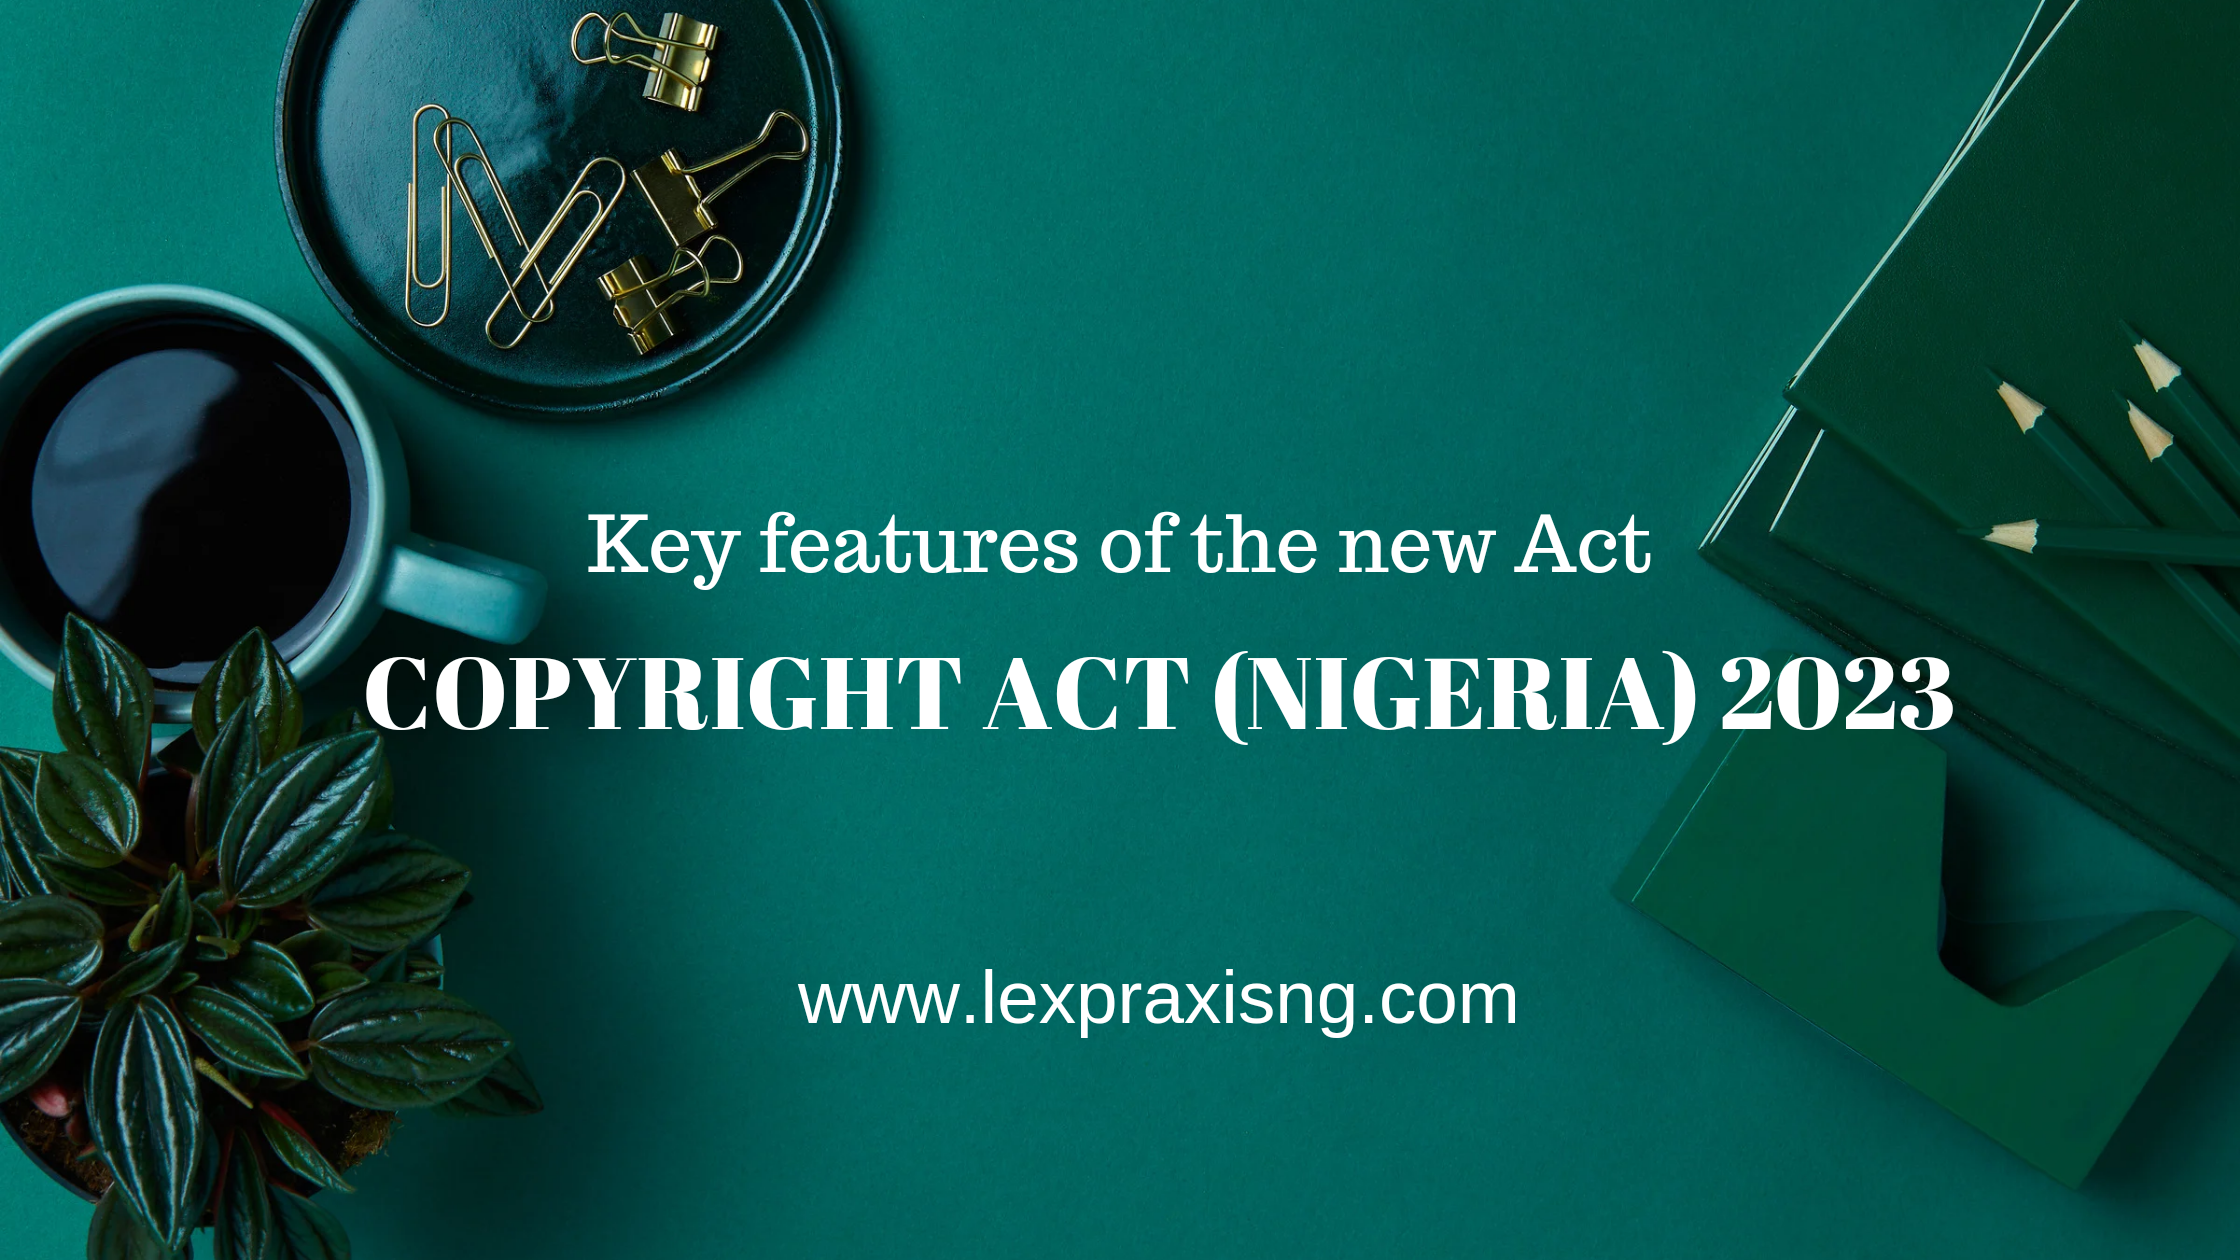 Copyright Act Nigeria 2023- Key features of the Act